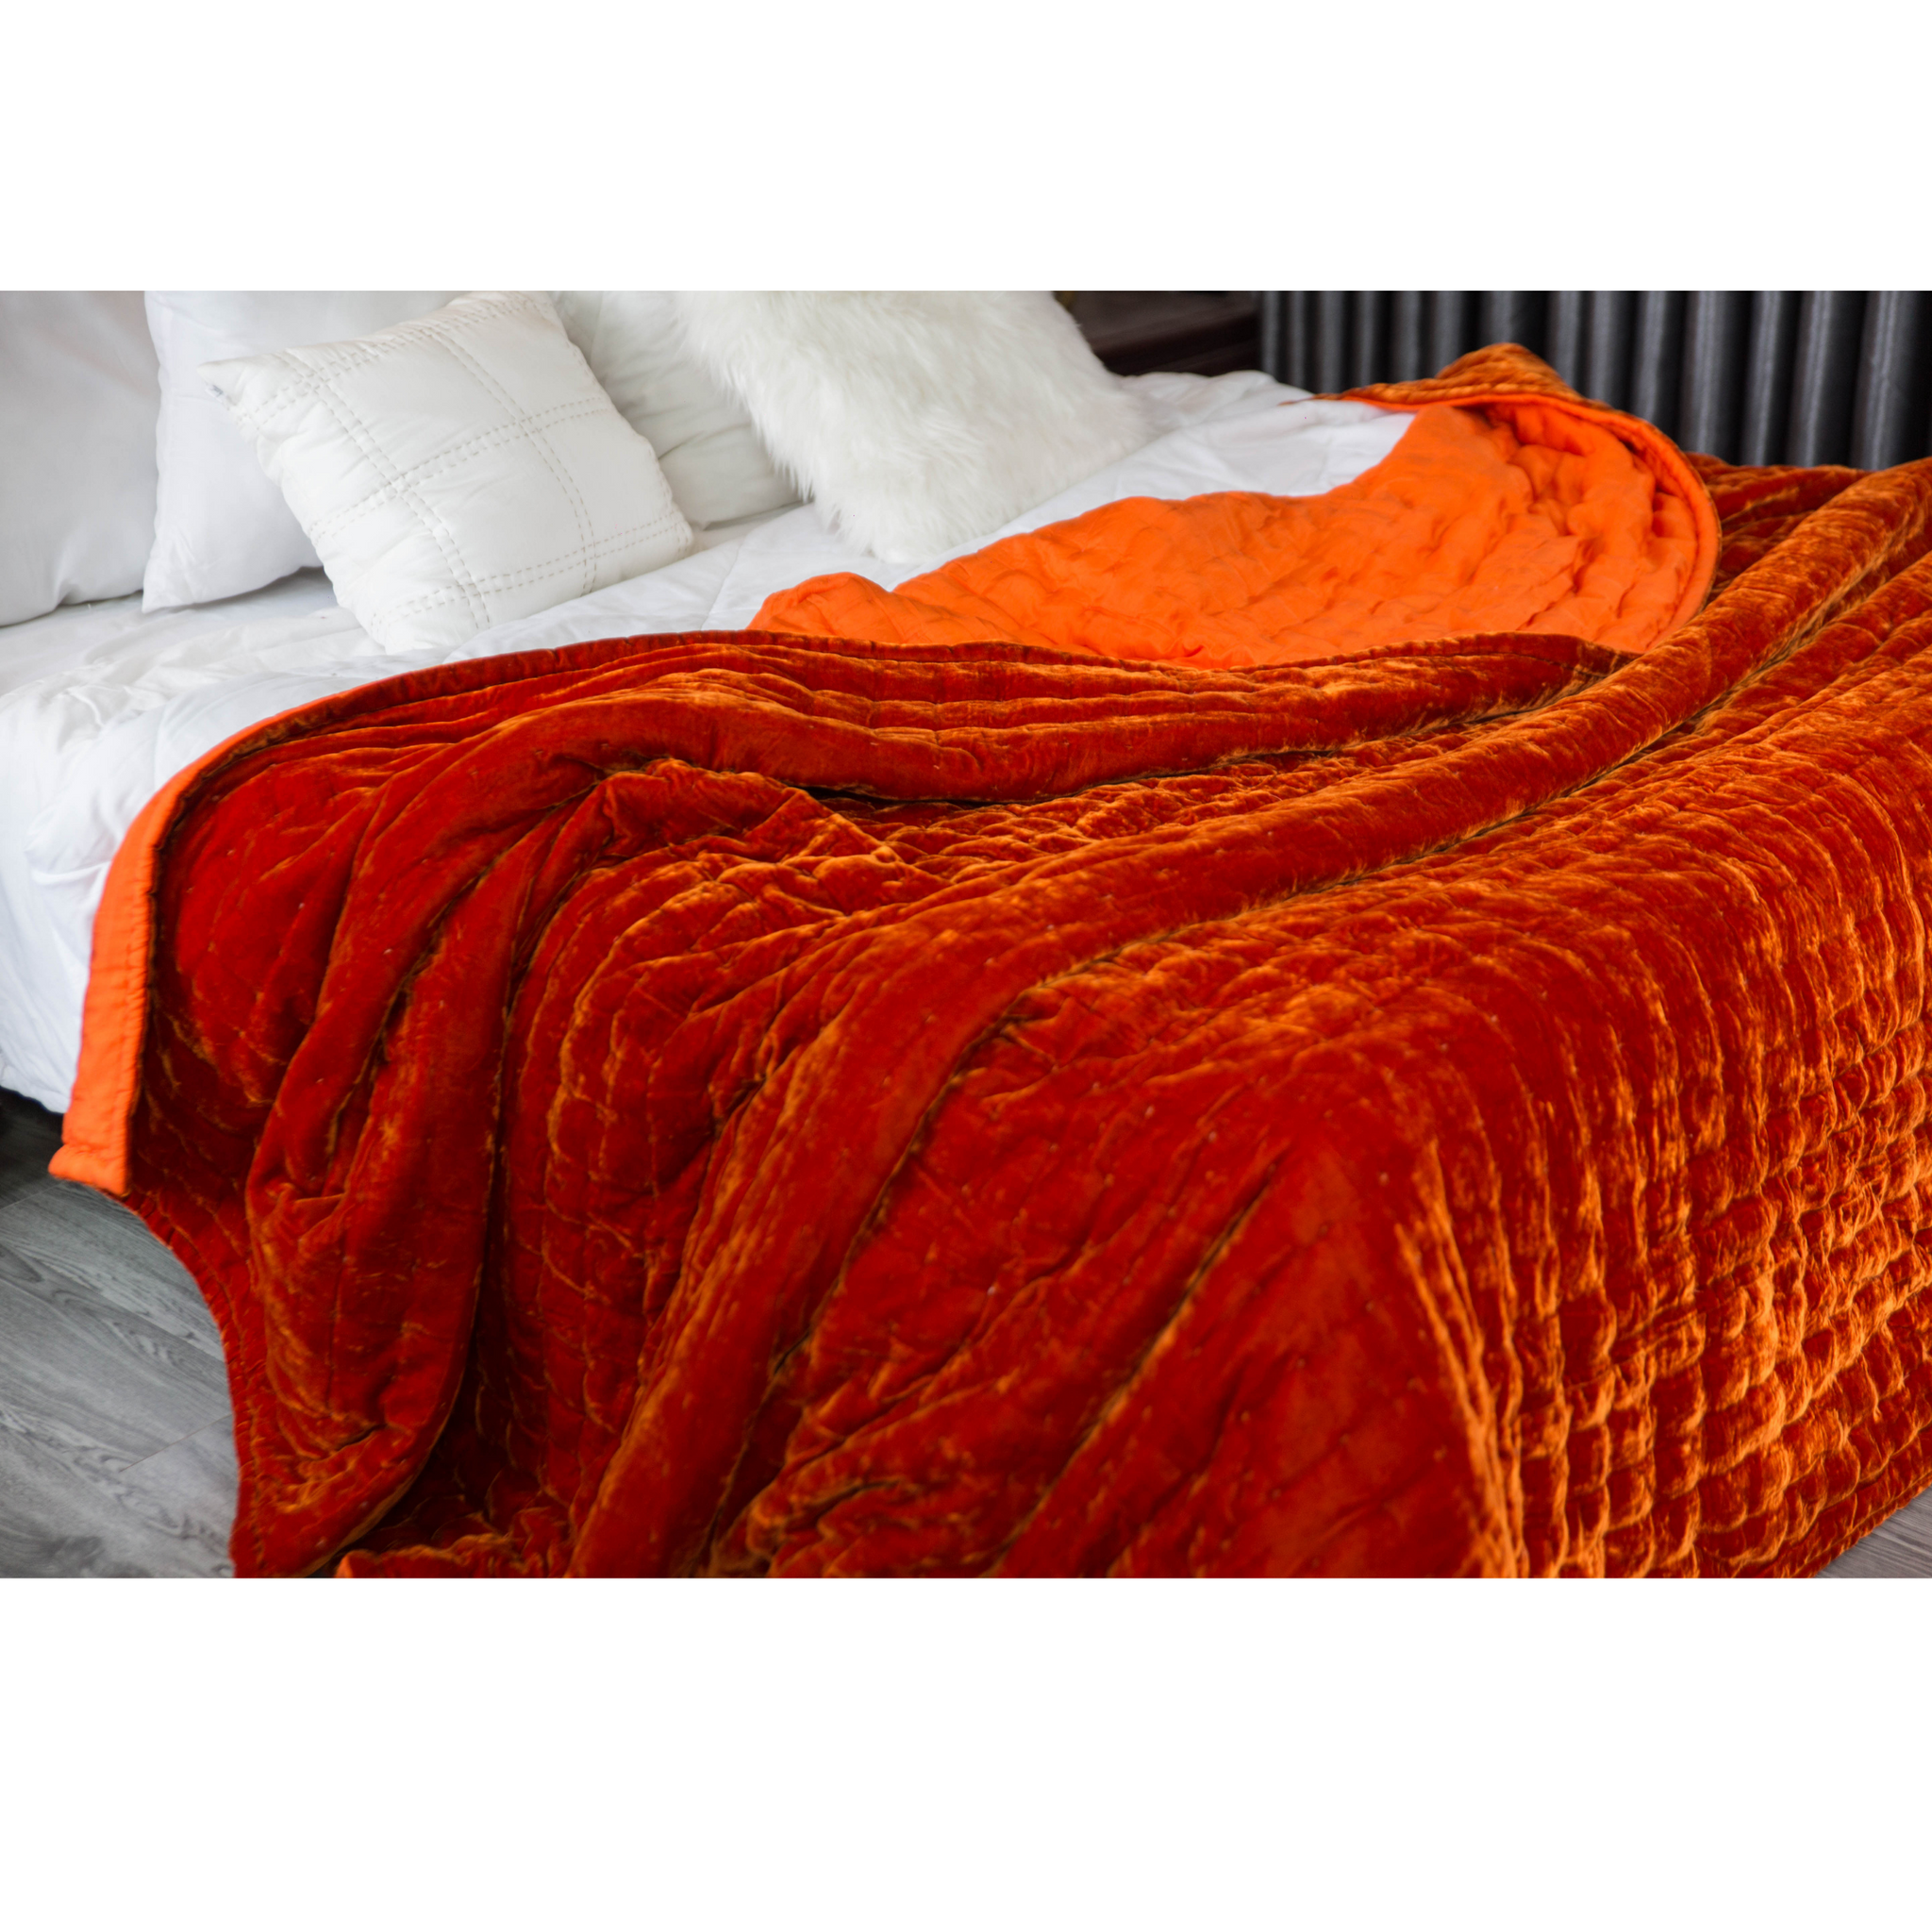 Silk Velvet Quilts & Throws|Hand Quilted Coverlet|Flame Orange|Starry